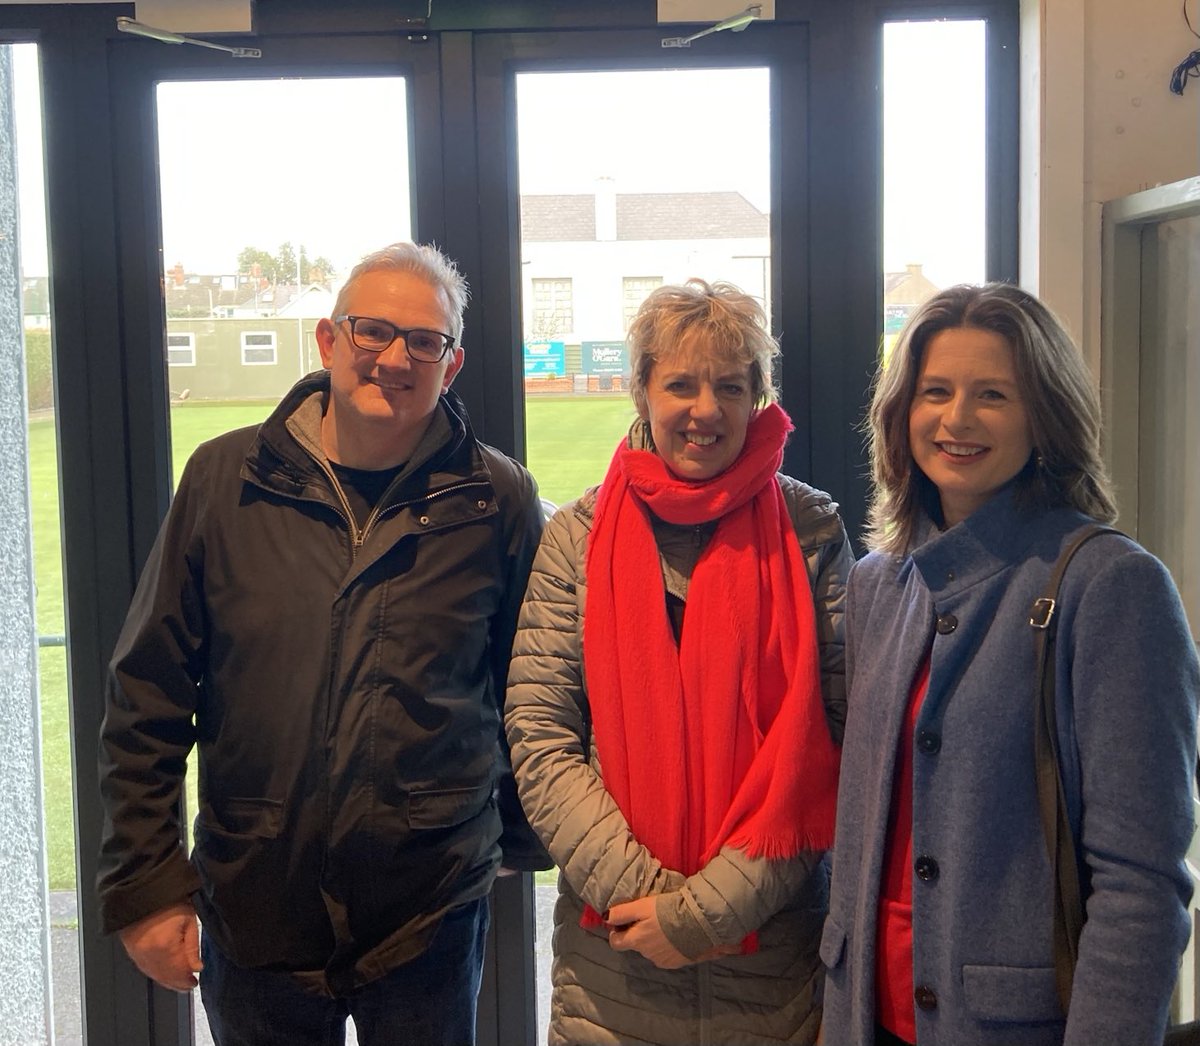 Thanks to Ruth, David and all at ⁦@terenuresports⁩ ⁦@TerenureCC⁩ for the tour of clubhouse and grounds today - great to see so many sports and activities going on locally! #Terenure